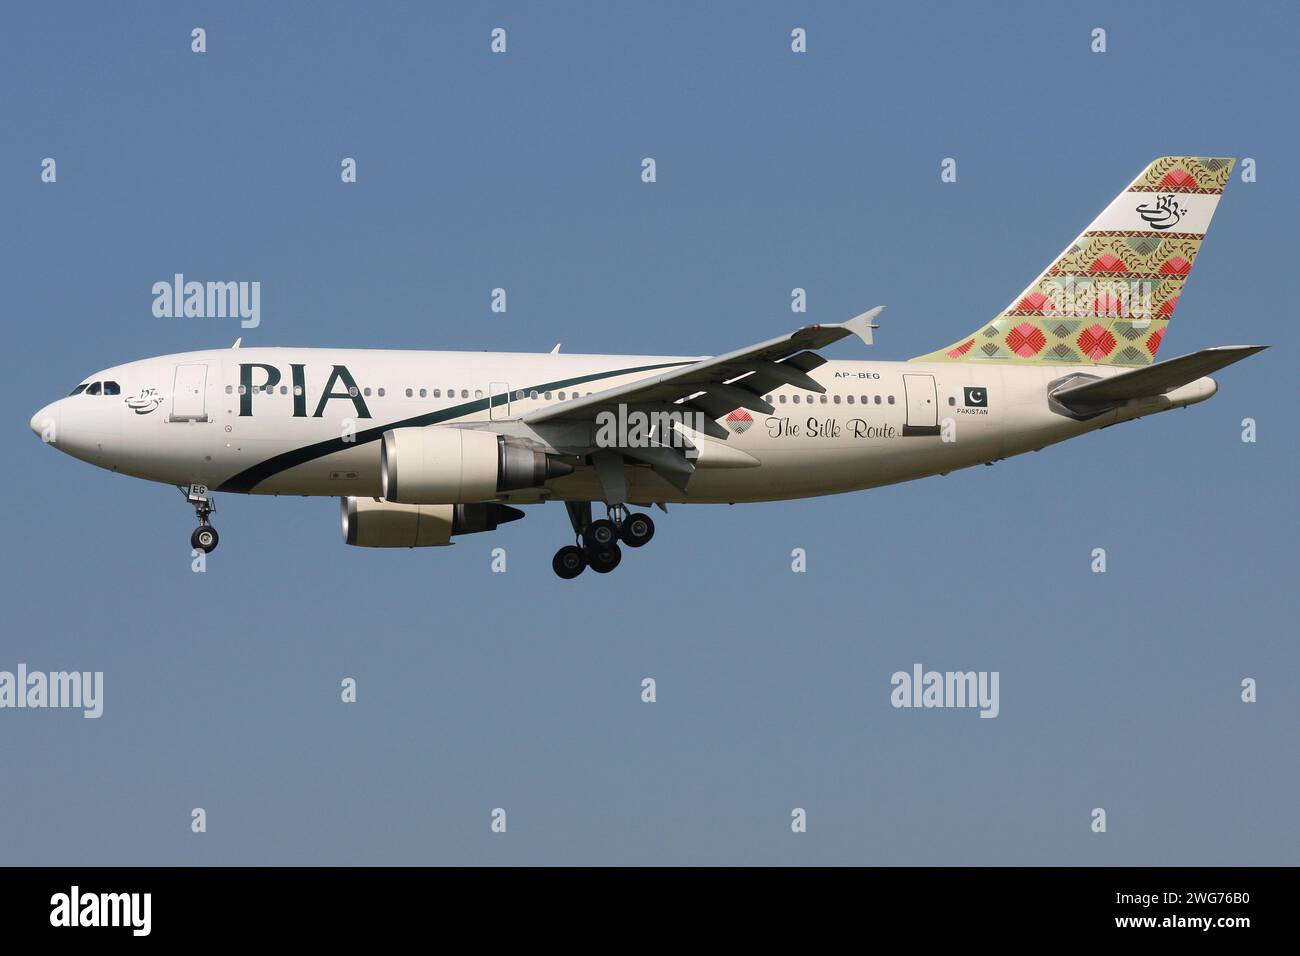 PIA Pakistan International Airlines Airbus A310-300 with registration AP-BEG on final for Amsterdam Airport Schiphol Stock Photo